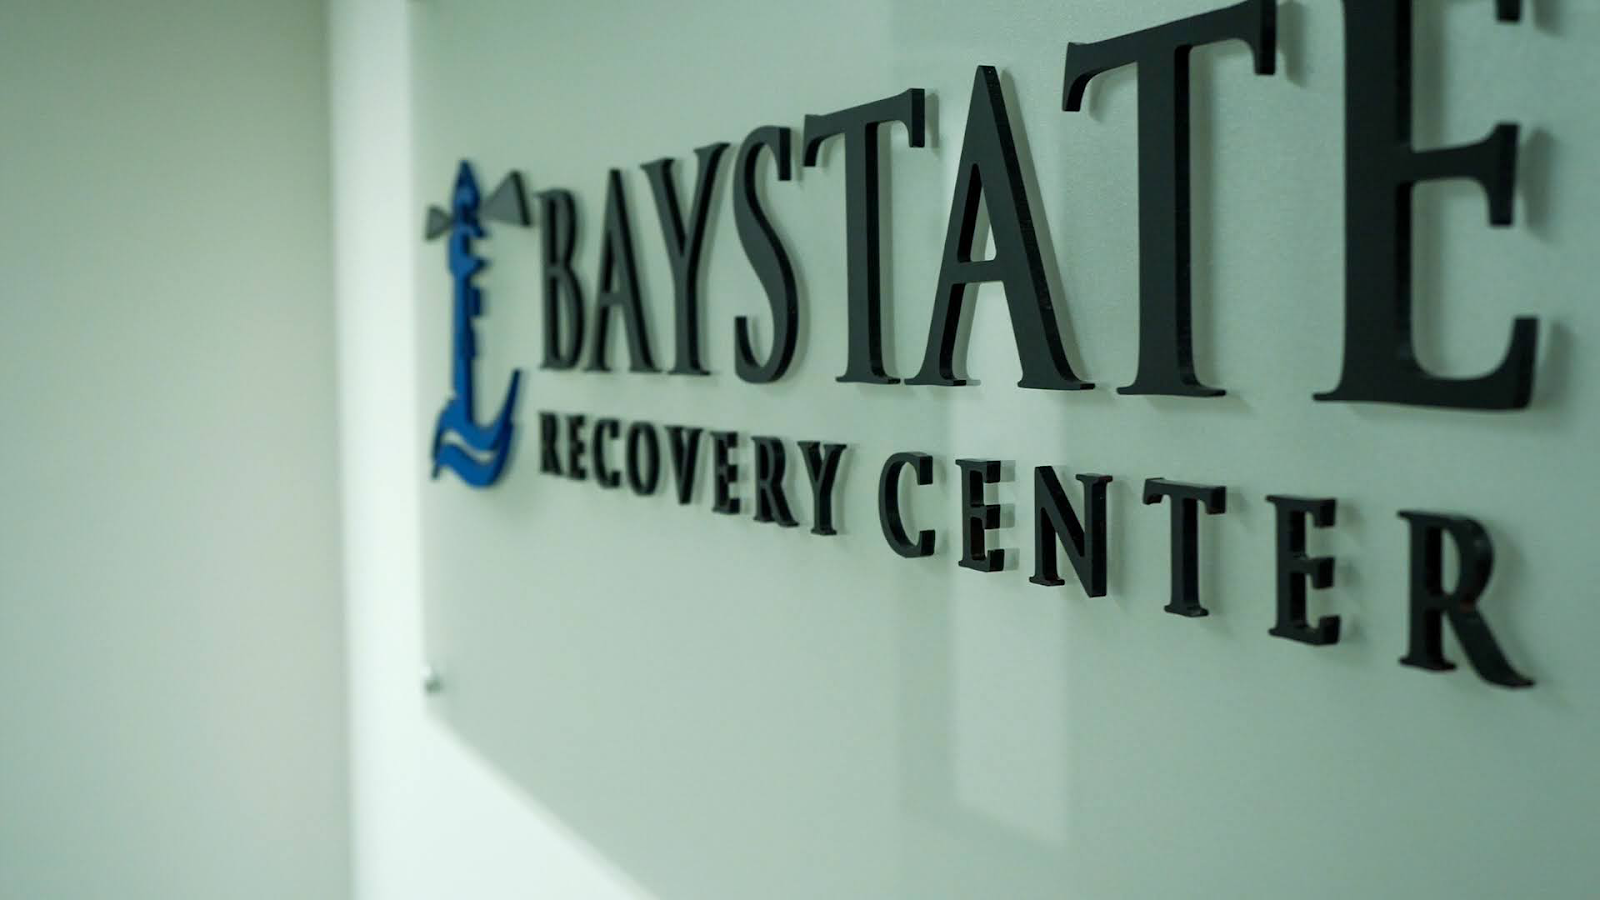 Baystate Recovery Center